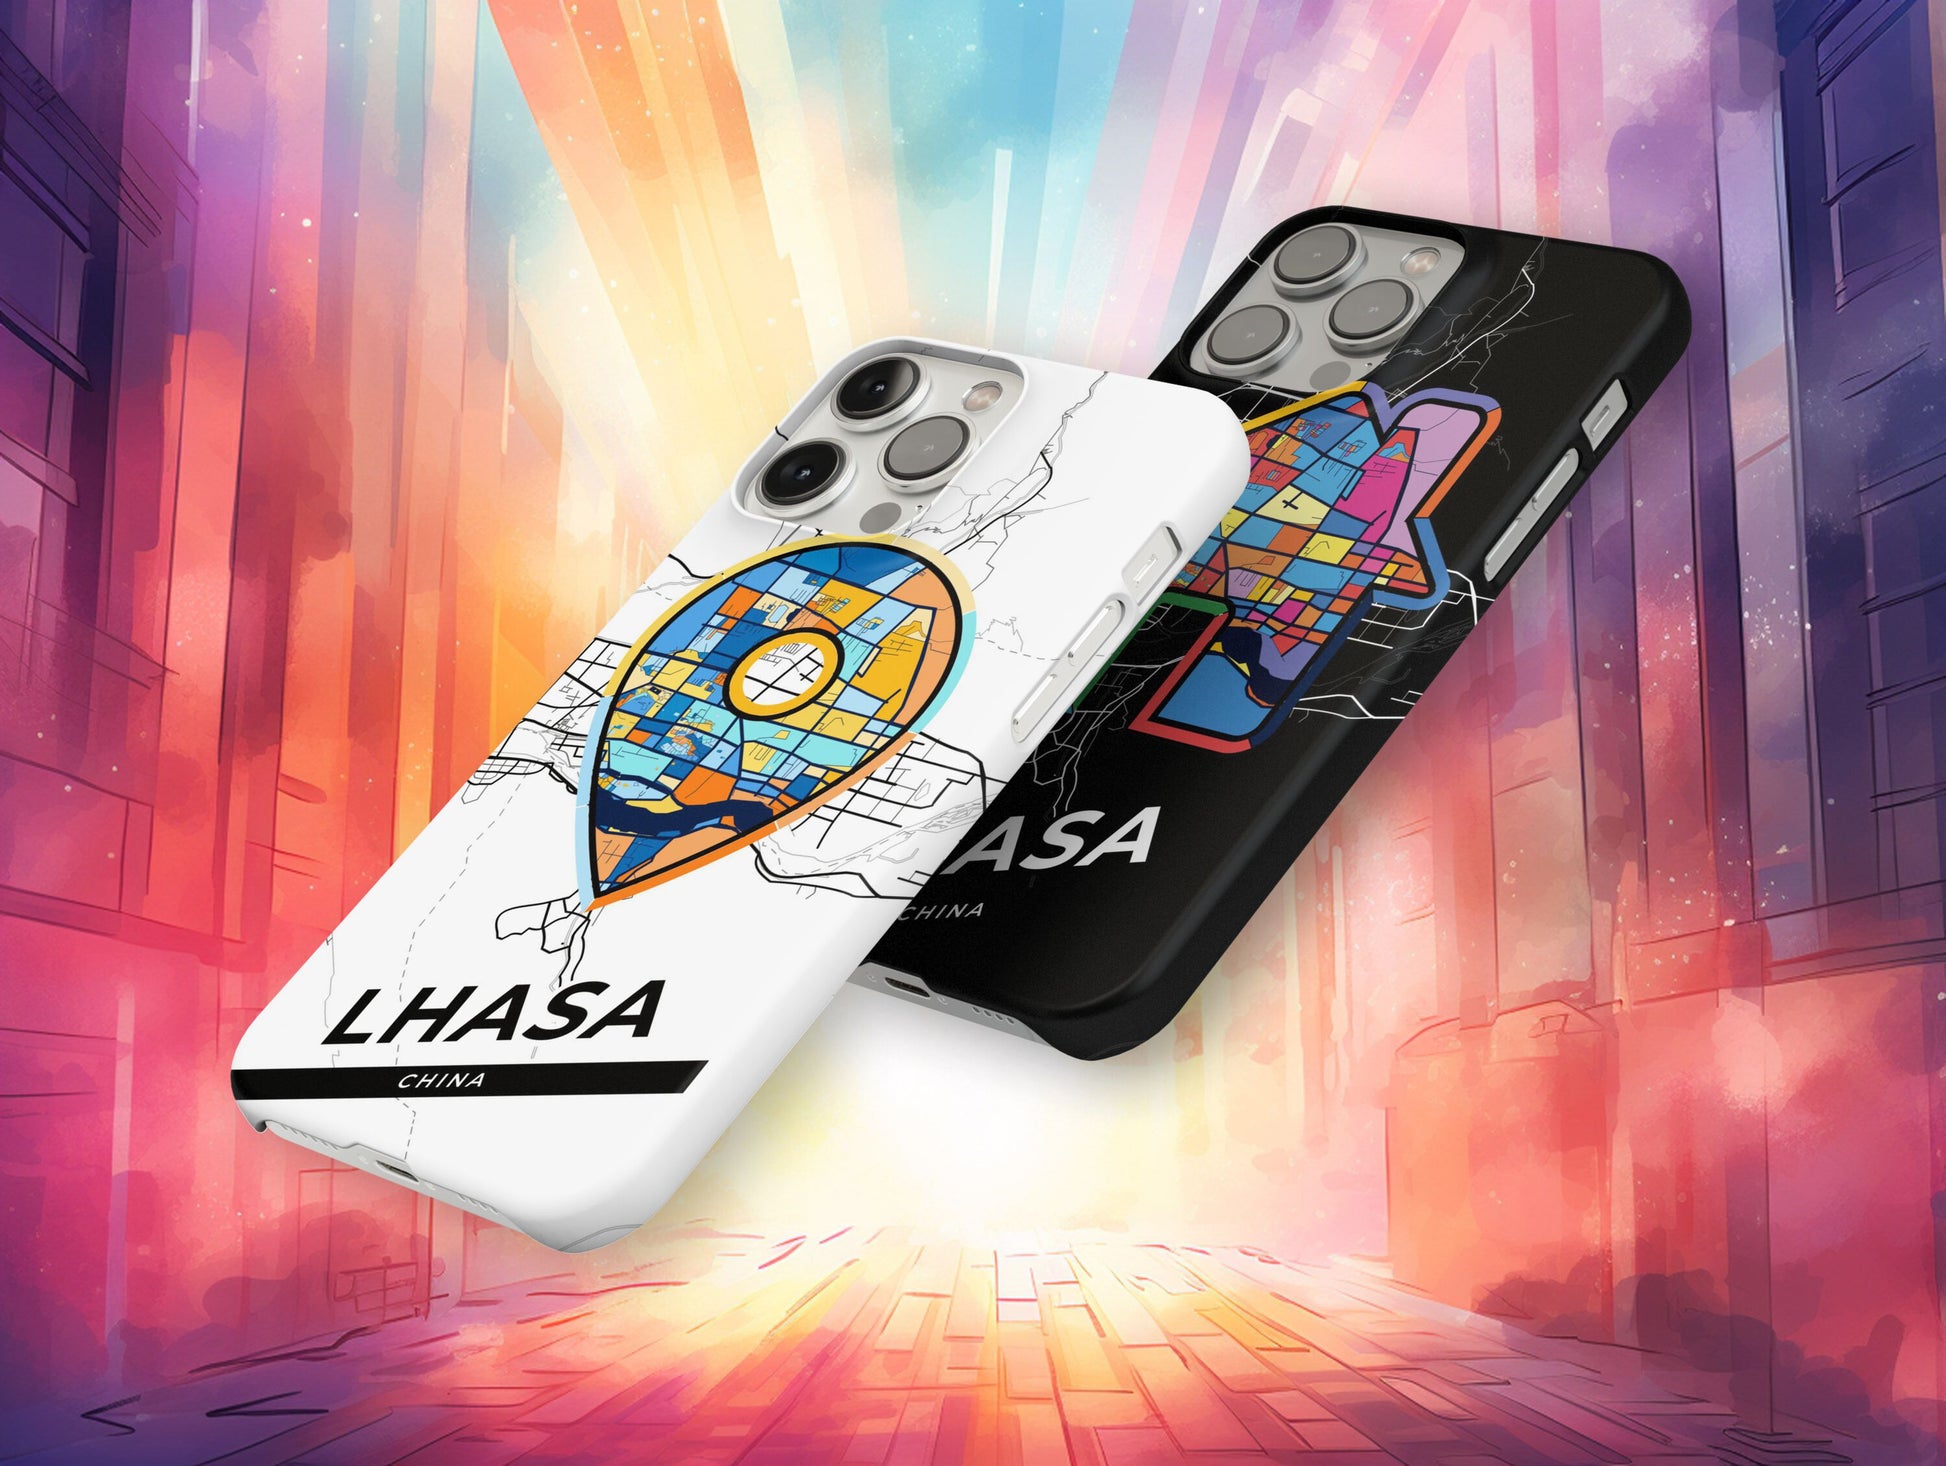 Lhasa China slim phone case with colorful icon. Birthday, wedding or housewarming gift. Couple match cases.